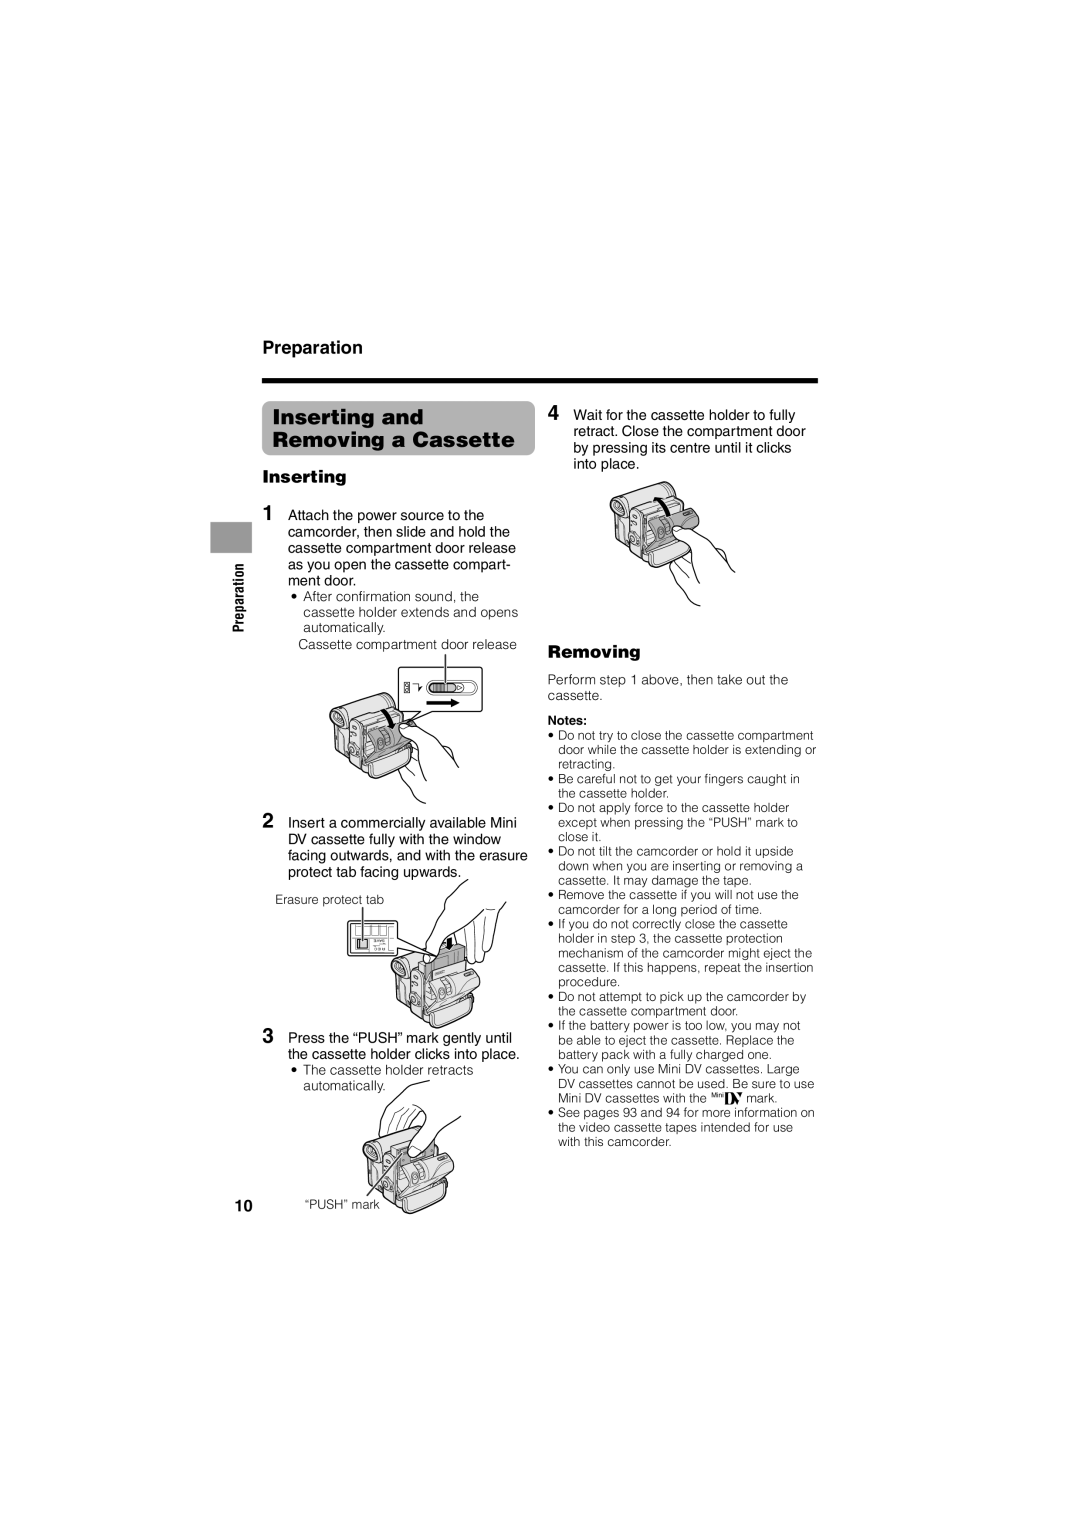 Sharp VL-Z400H-T operation manual Inserting and Removing a Cassette, Preparation, Save C E R 